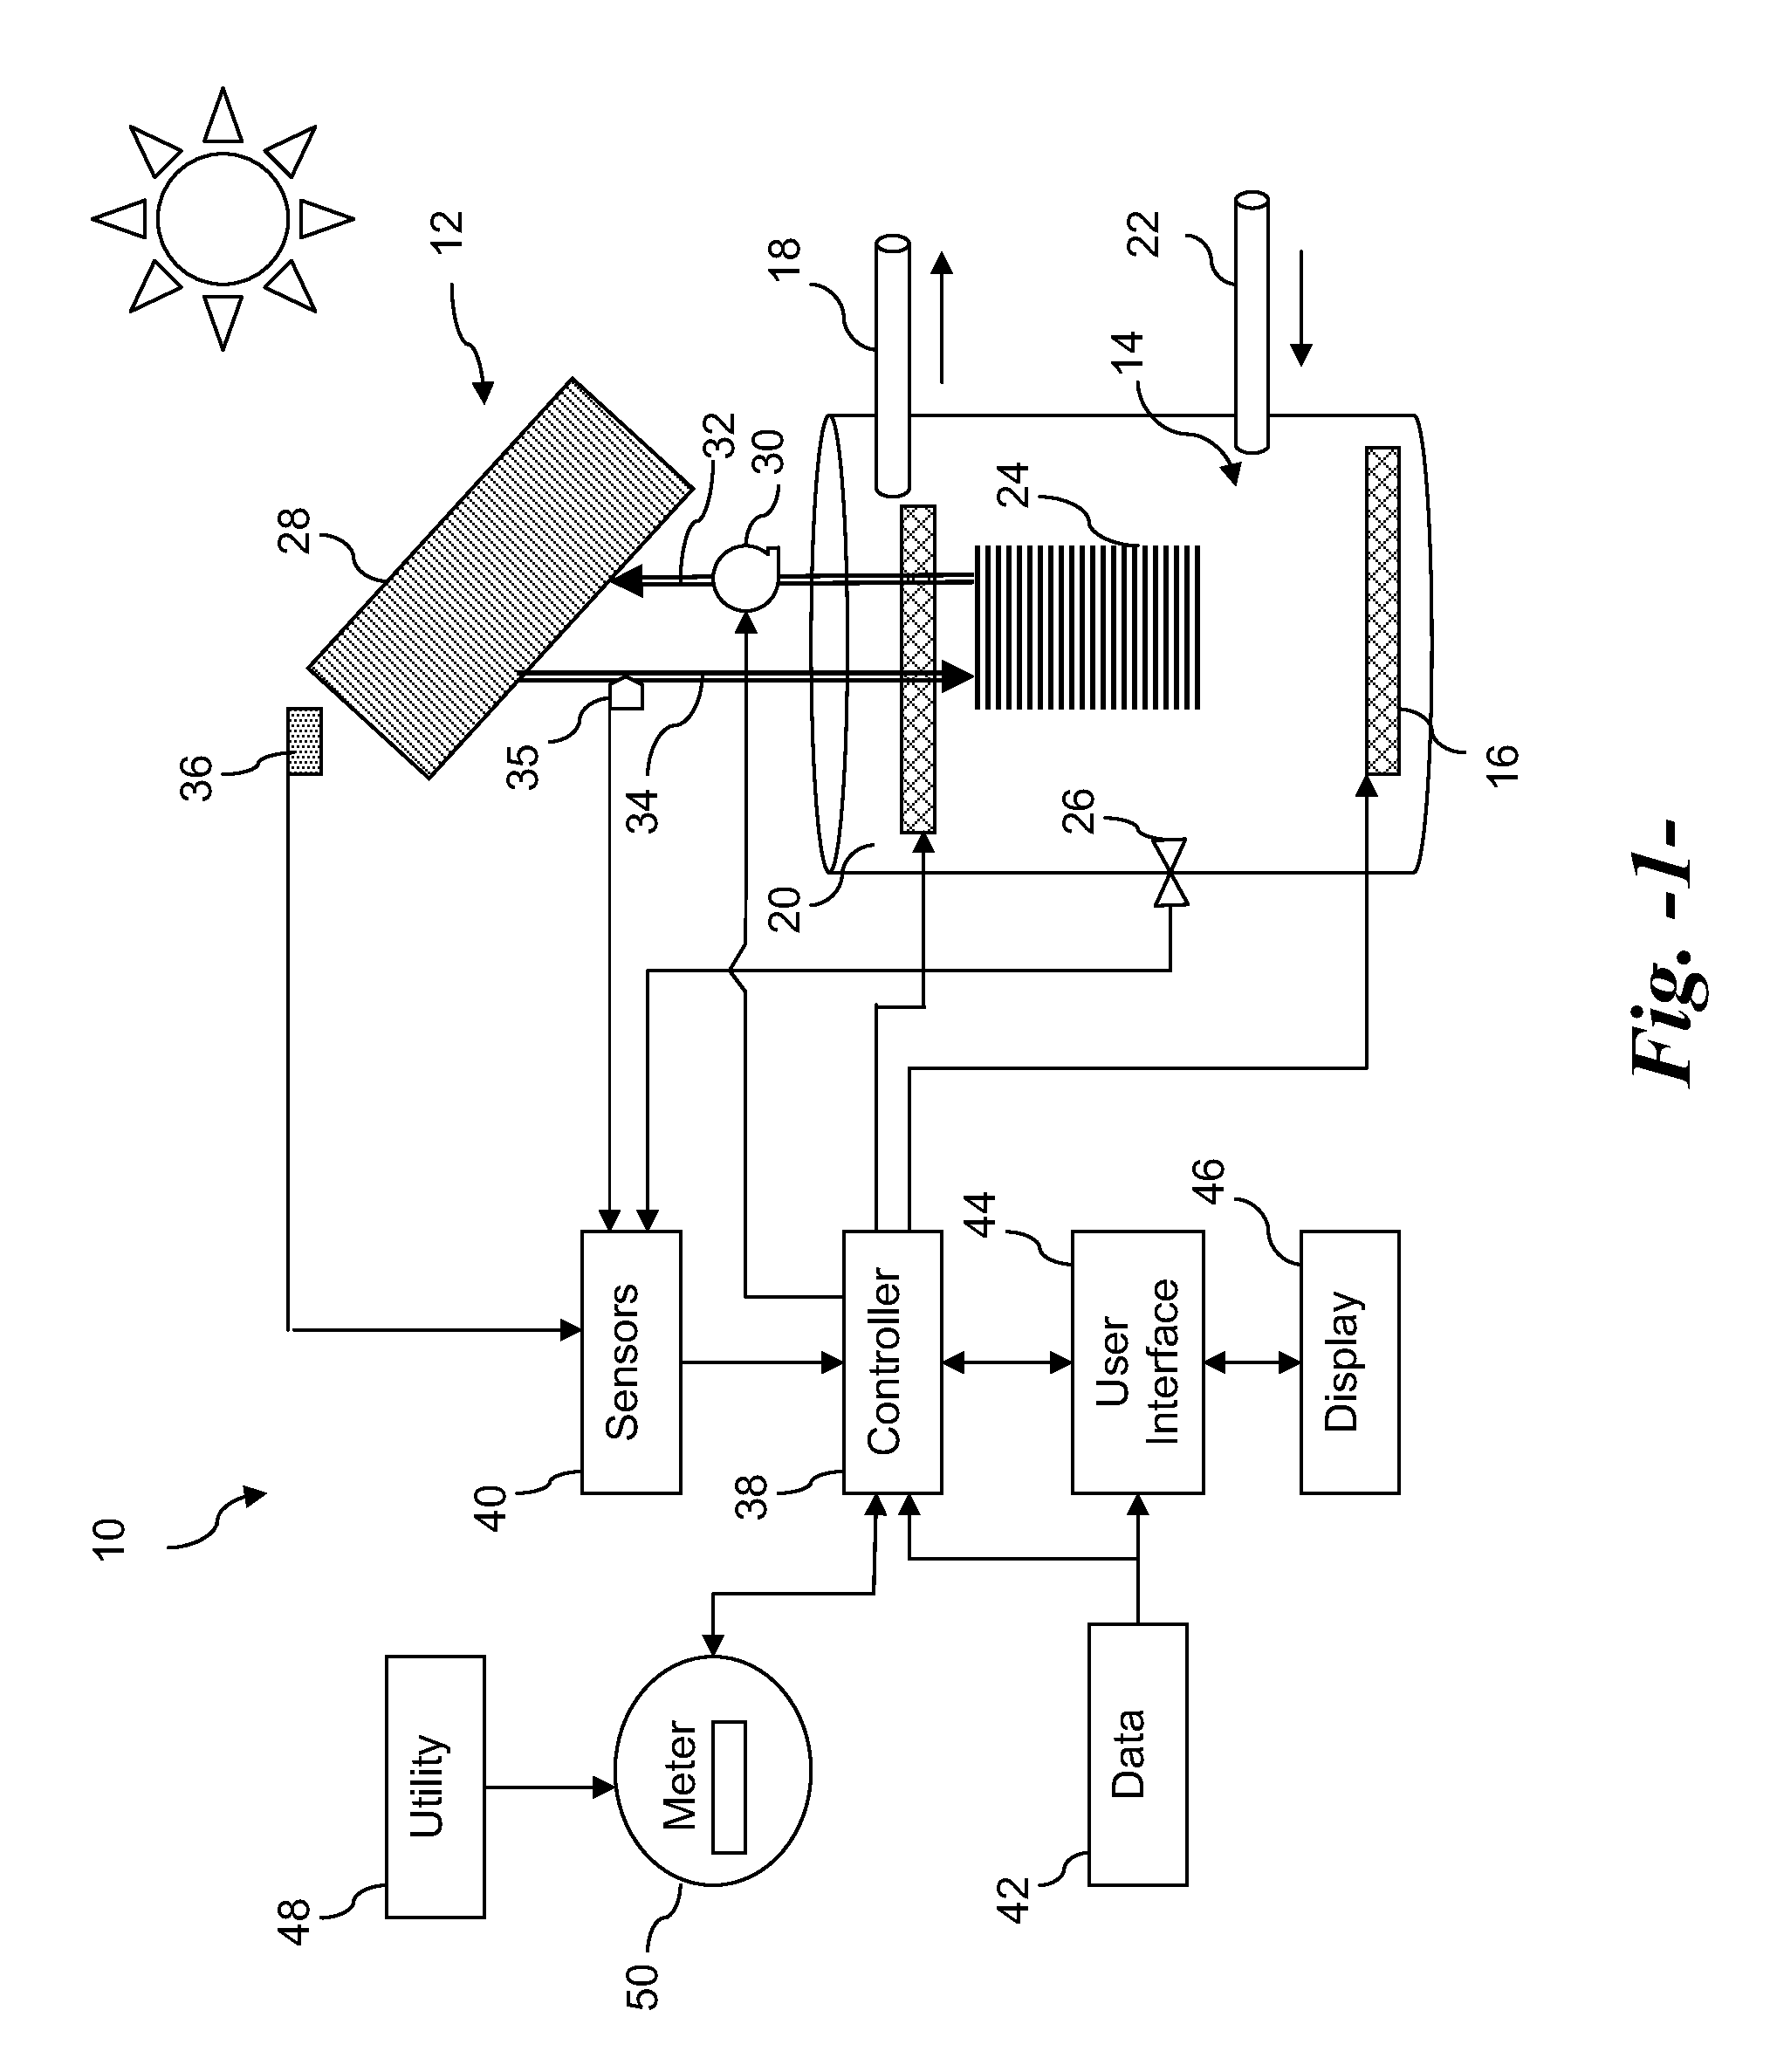 Energy management system with solar water heater